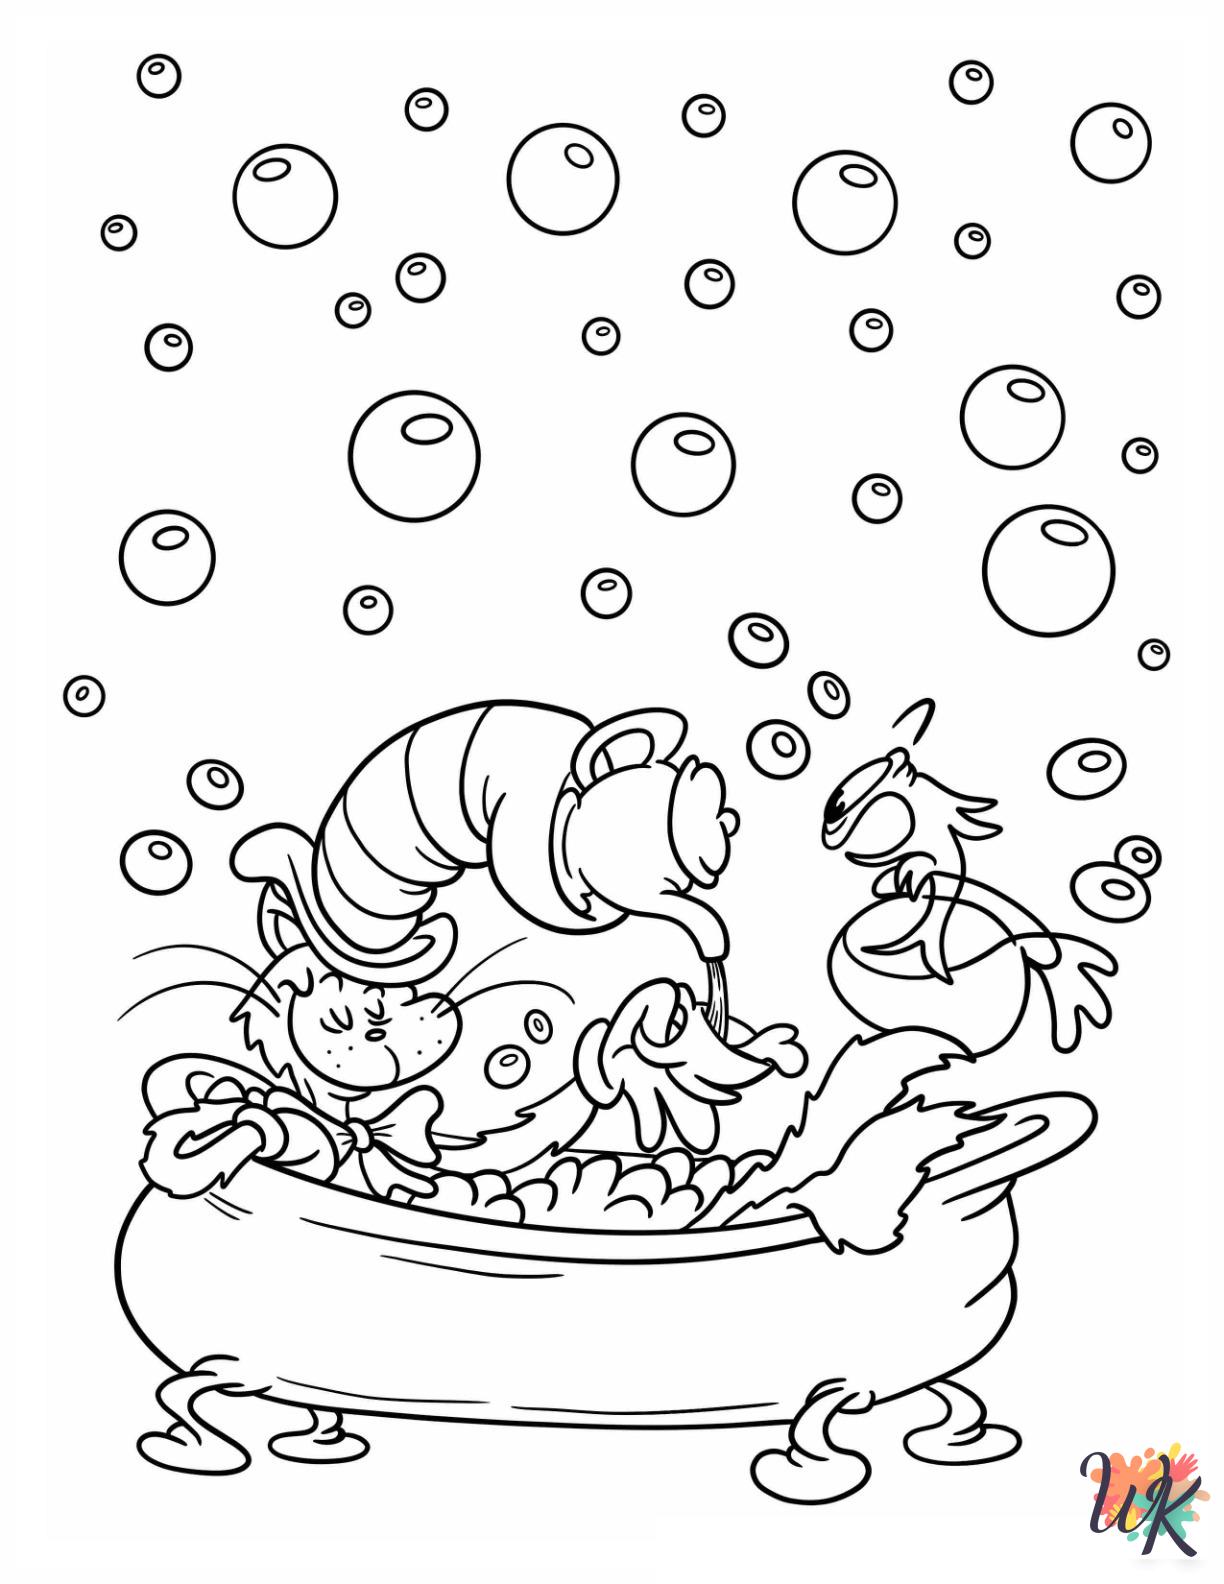 Dr. Seuss coloring pages for adults pdf